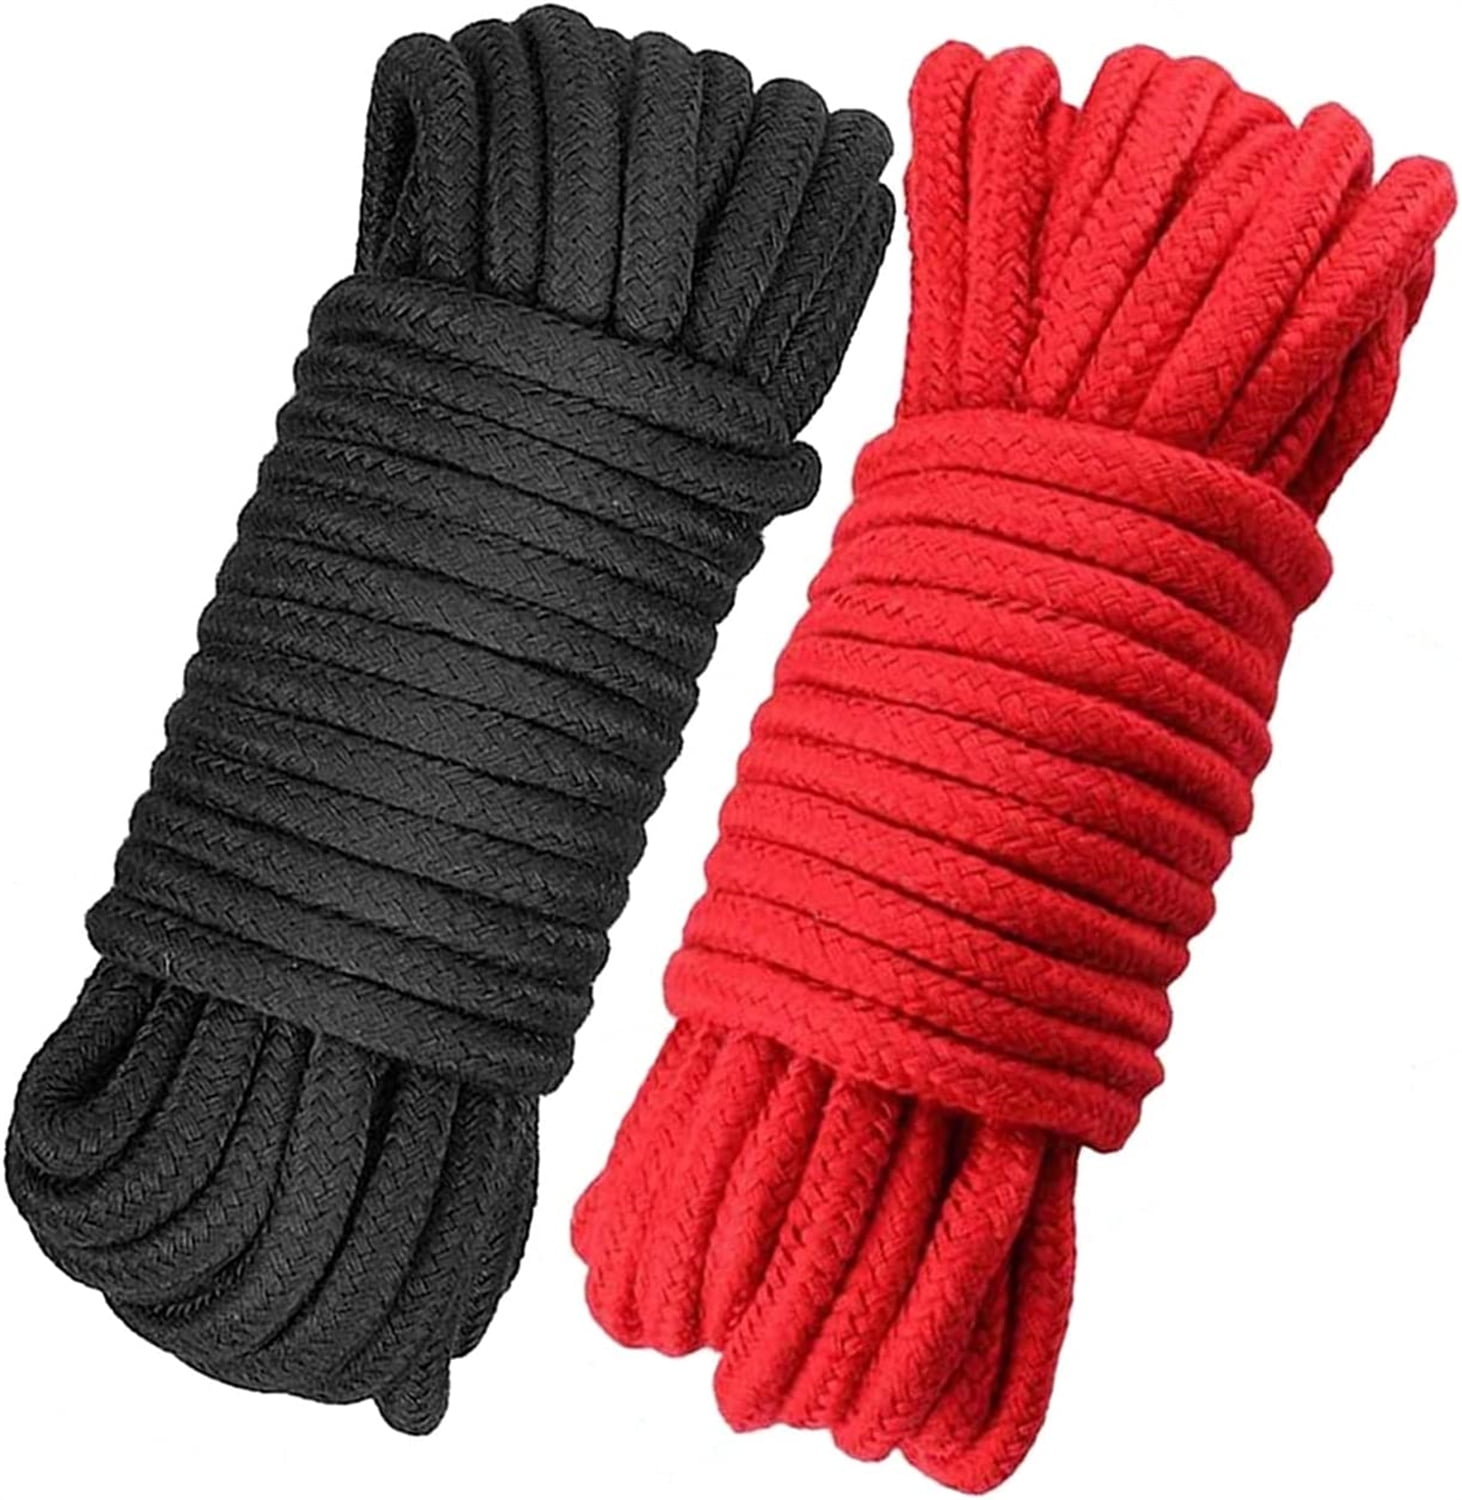 Casewin 1 Pack Soft Nylon Rope, Multipurpose Durable Long Rope Craft Rope,  65.6 Feet/20M Soft Twisted Nylon Knot Tying Rope Cord, Utility Braided Rope